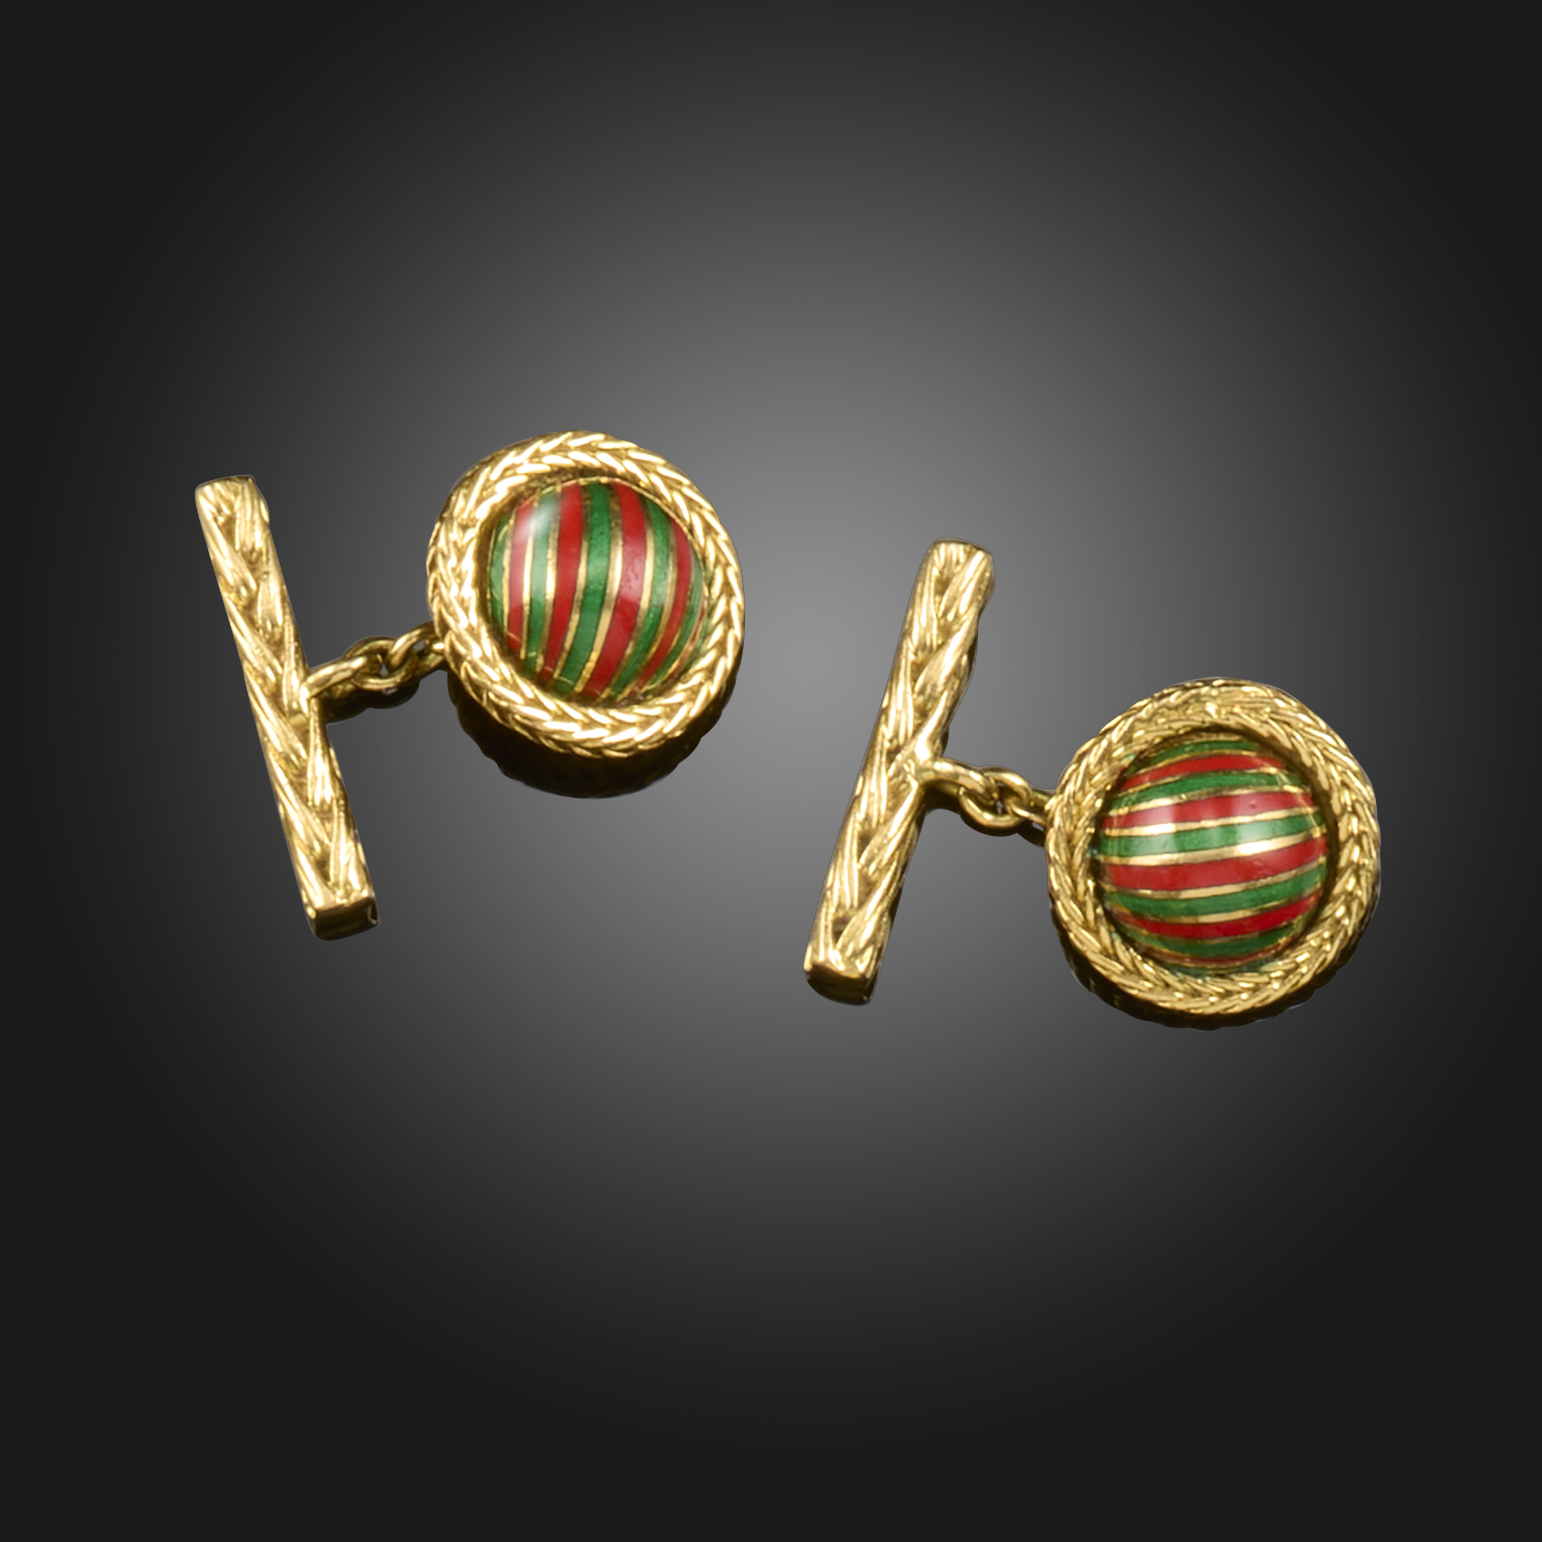 A pair of green and red enamel striped semi-spherical gold cufflinks by Boucheron, in chevron-